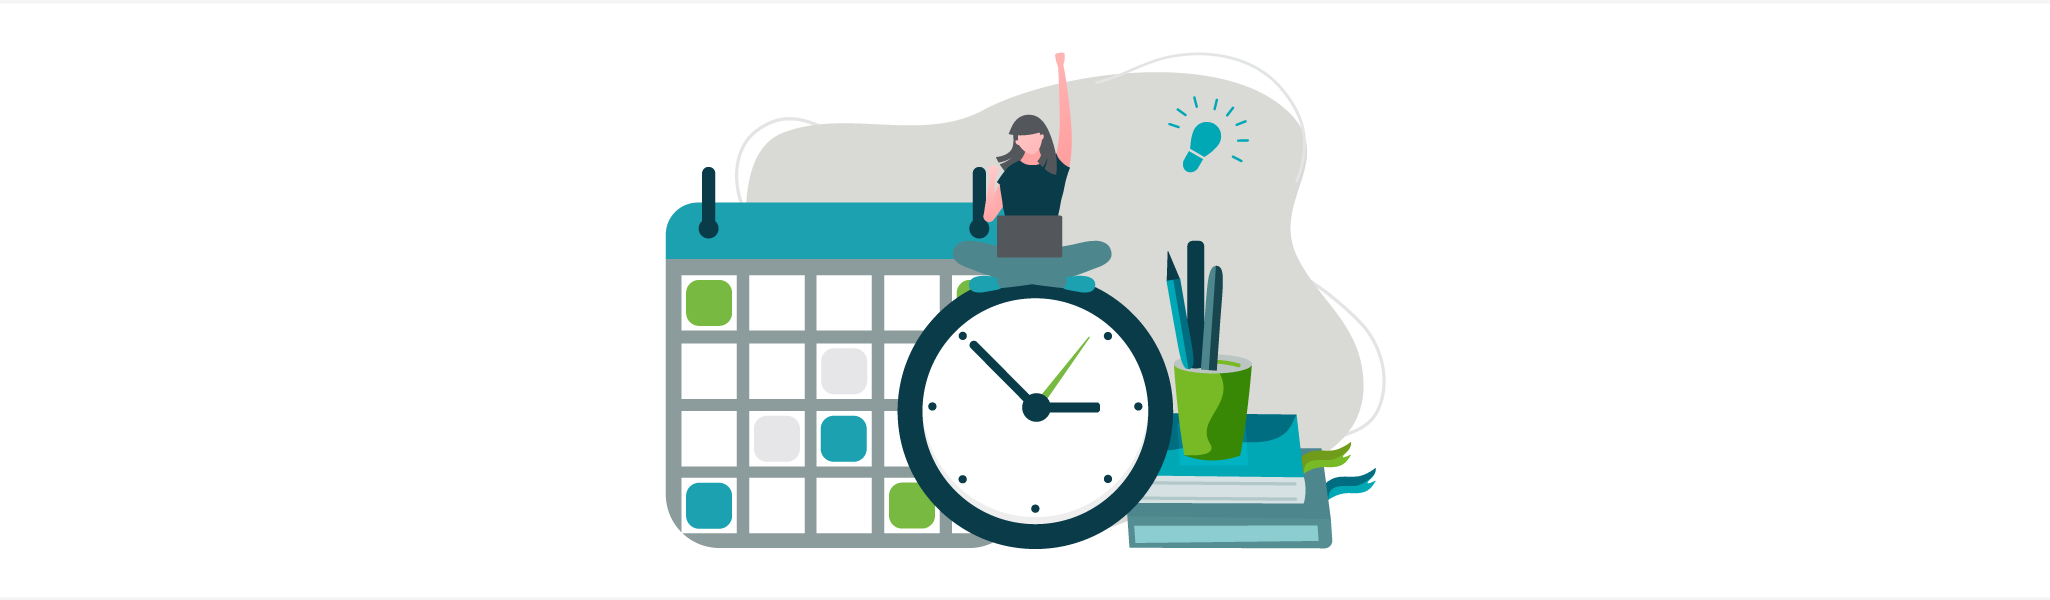 4 Easy Tips for Schedule Optimization